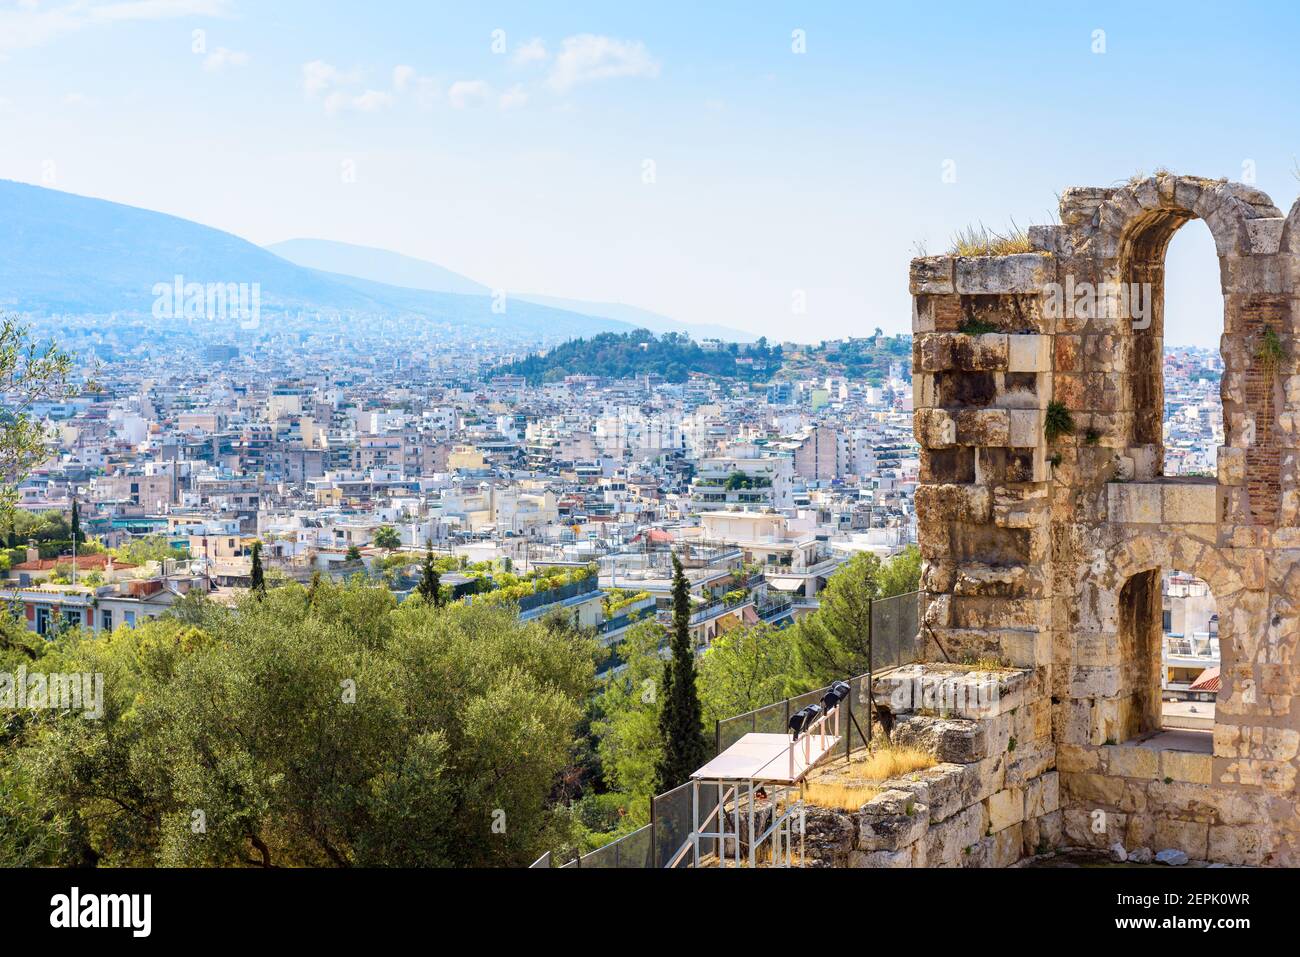 Athens skyline, Greece. View from Acropolis, ruins of Odeon of Herodes Atticus in foreground. This place is landmark of Athens. Urban landscape of Ath Stock Photo